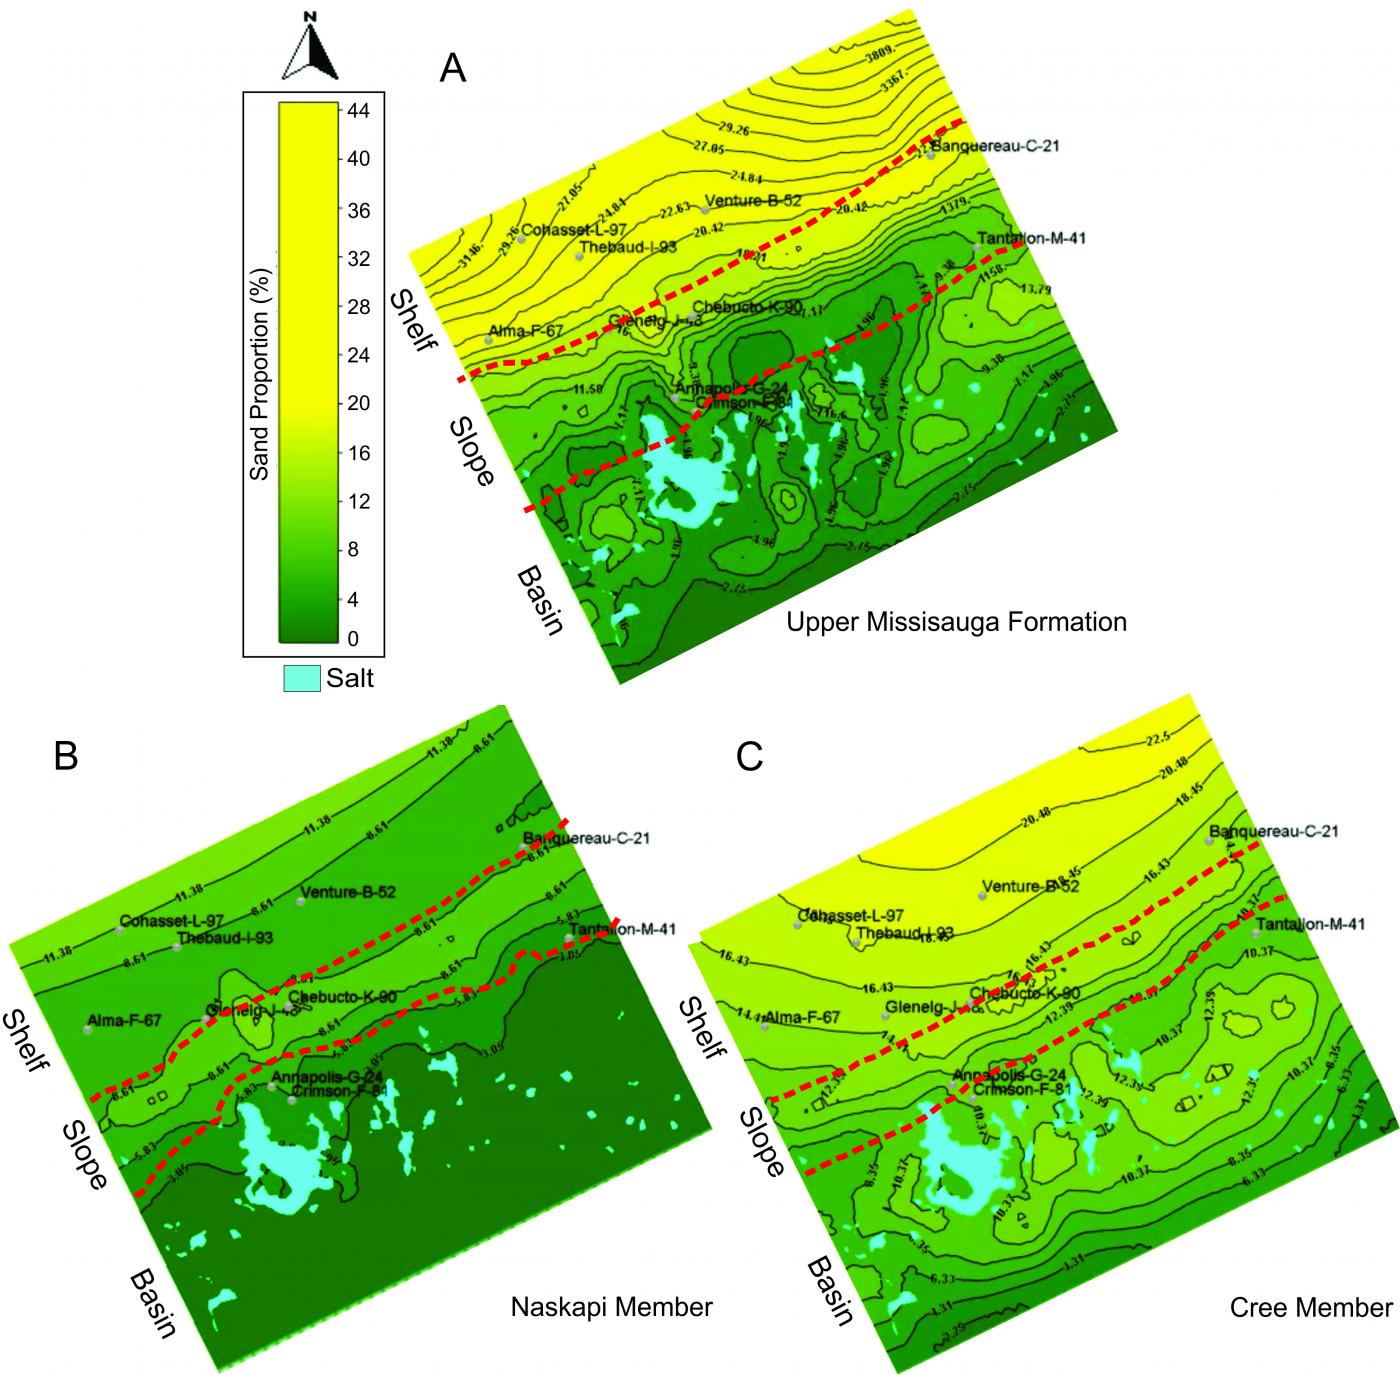 Predictive modelling of sandstone reservoir quality in the Scotian Basin report image.